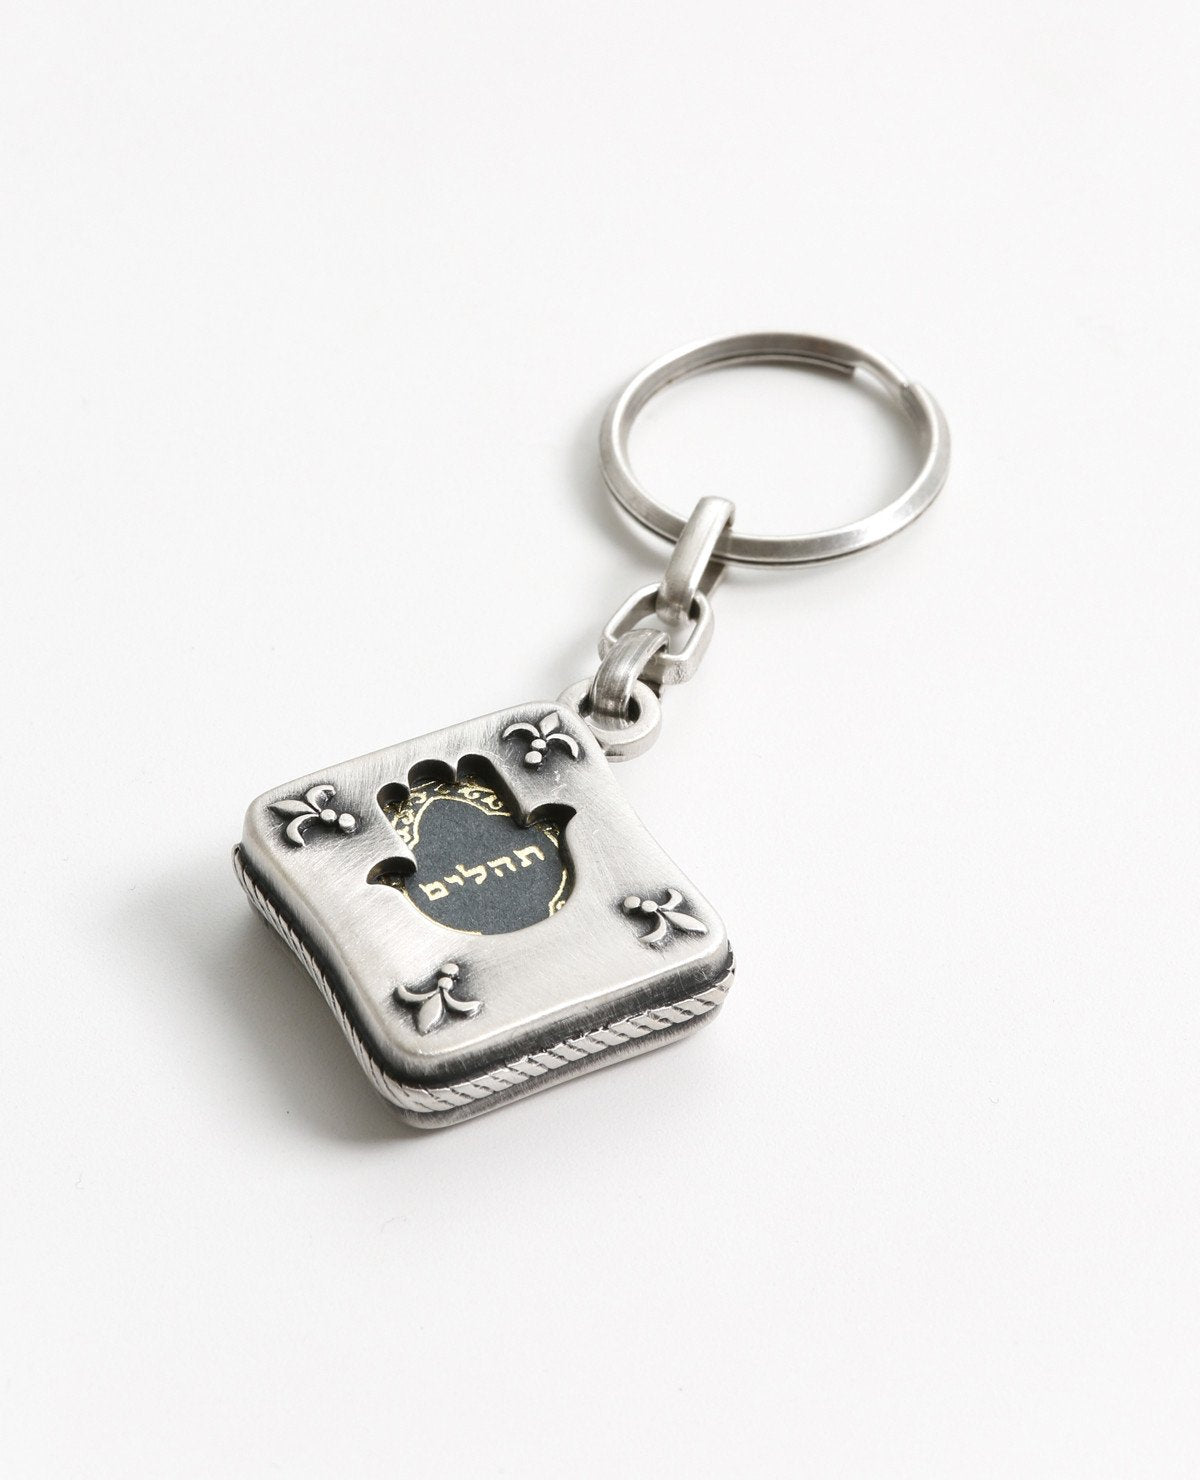 Tehillim is always with you. An exciting and elegantly designed keychain coated in sterling silver. Fashioned in the form of a small silver envelope with the book of Tehillim inside. The outline is designed on both sides as a frame with a hollow Hamsa shape in the middle, through which we can see the book on both its front and back sides. Feel safe and connected to your roots any time you have this wonderful keychain on you. You will feel even better when you grant it with love to the dearest people in your